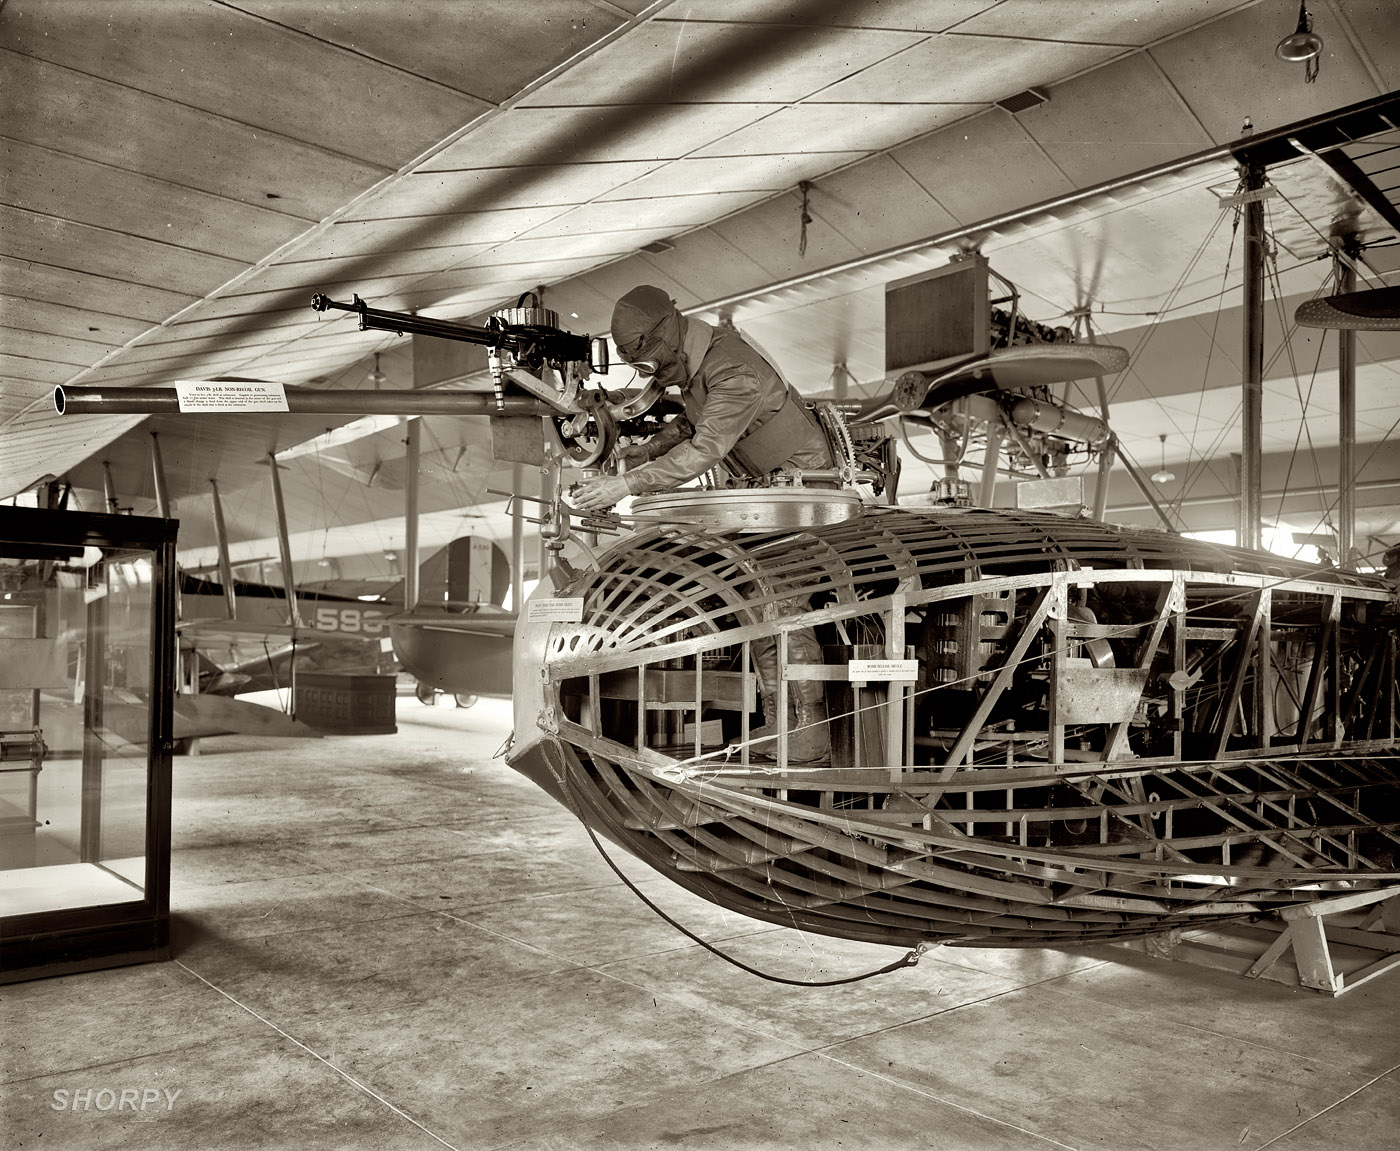 Circa 1921. Cutaway model of an F5L flying boat at the Smithsonian Institution in Washington. National Photo Company Collection glass negative. View full size.